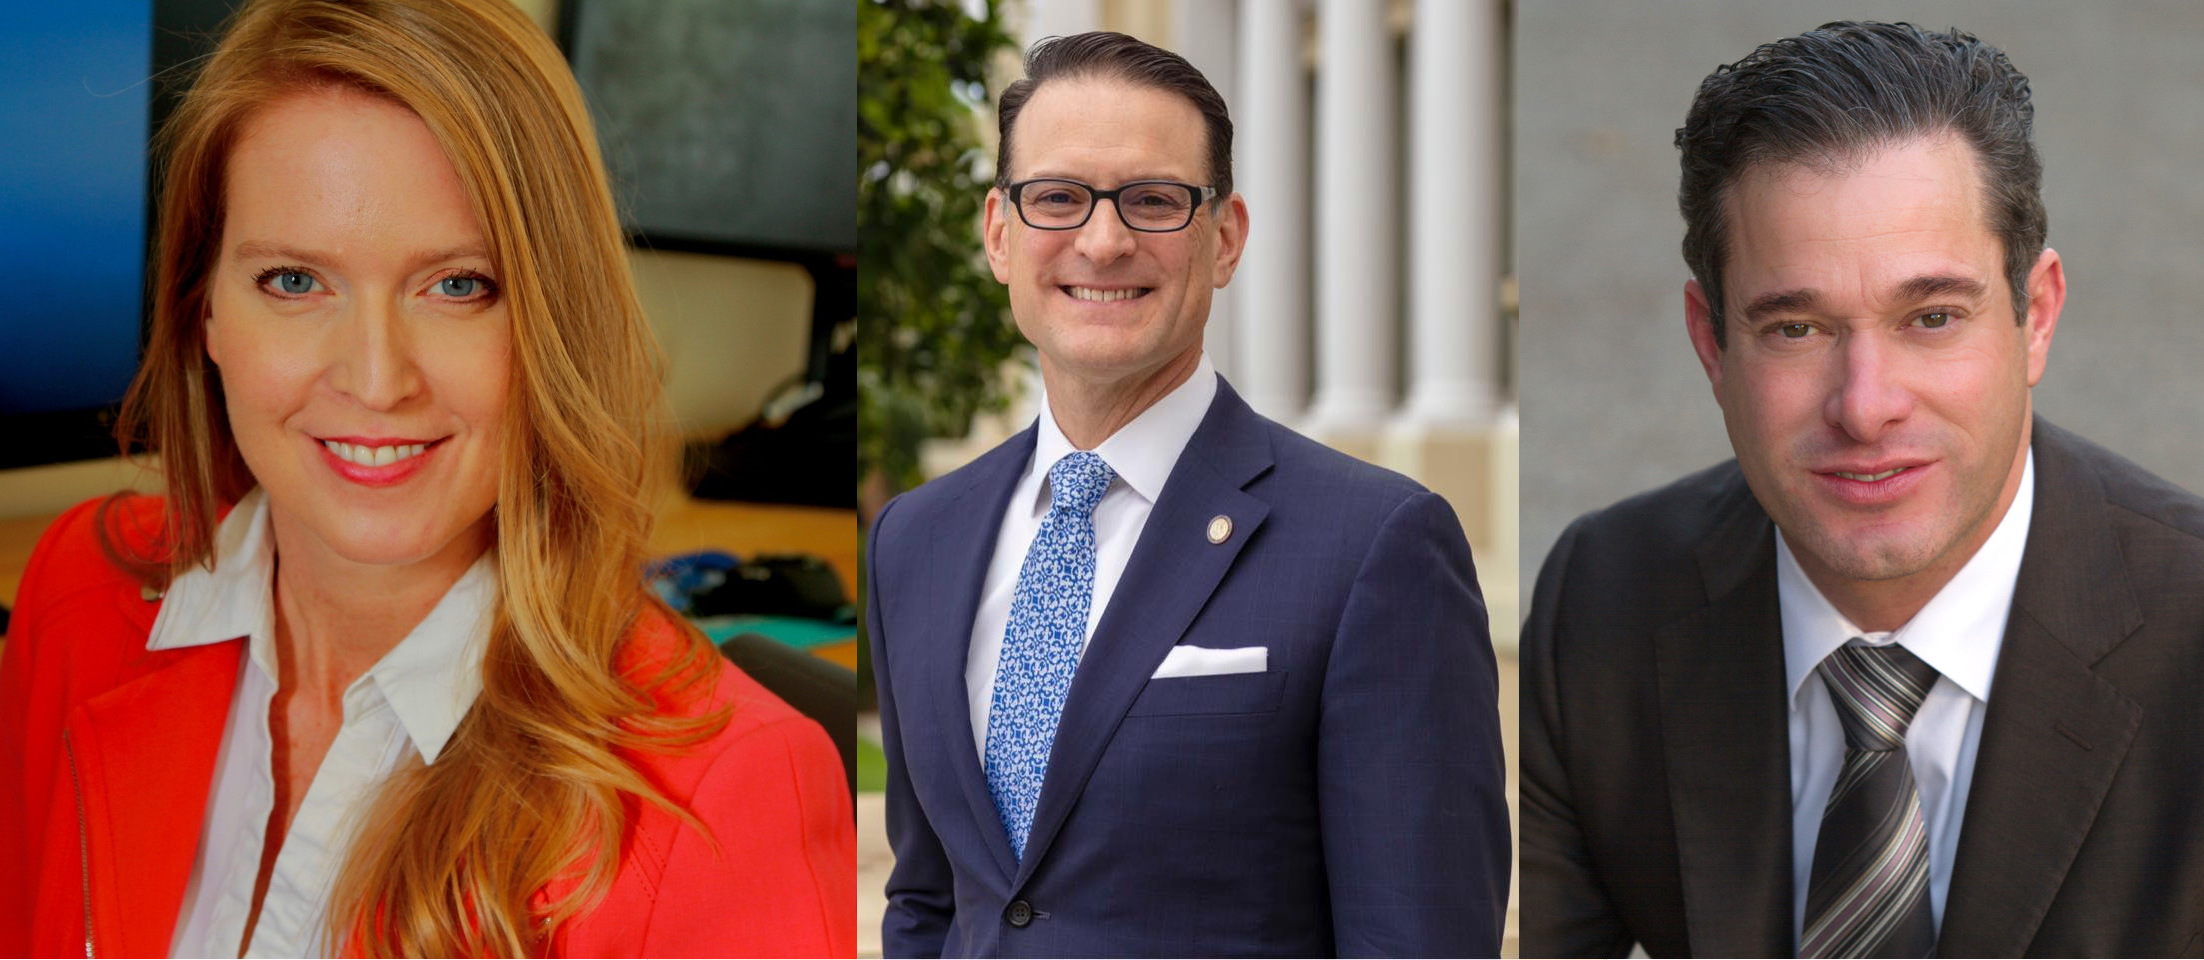 Candidate Q&A: Meet the Three Candidates Running for Riverside County District Attorney